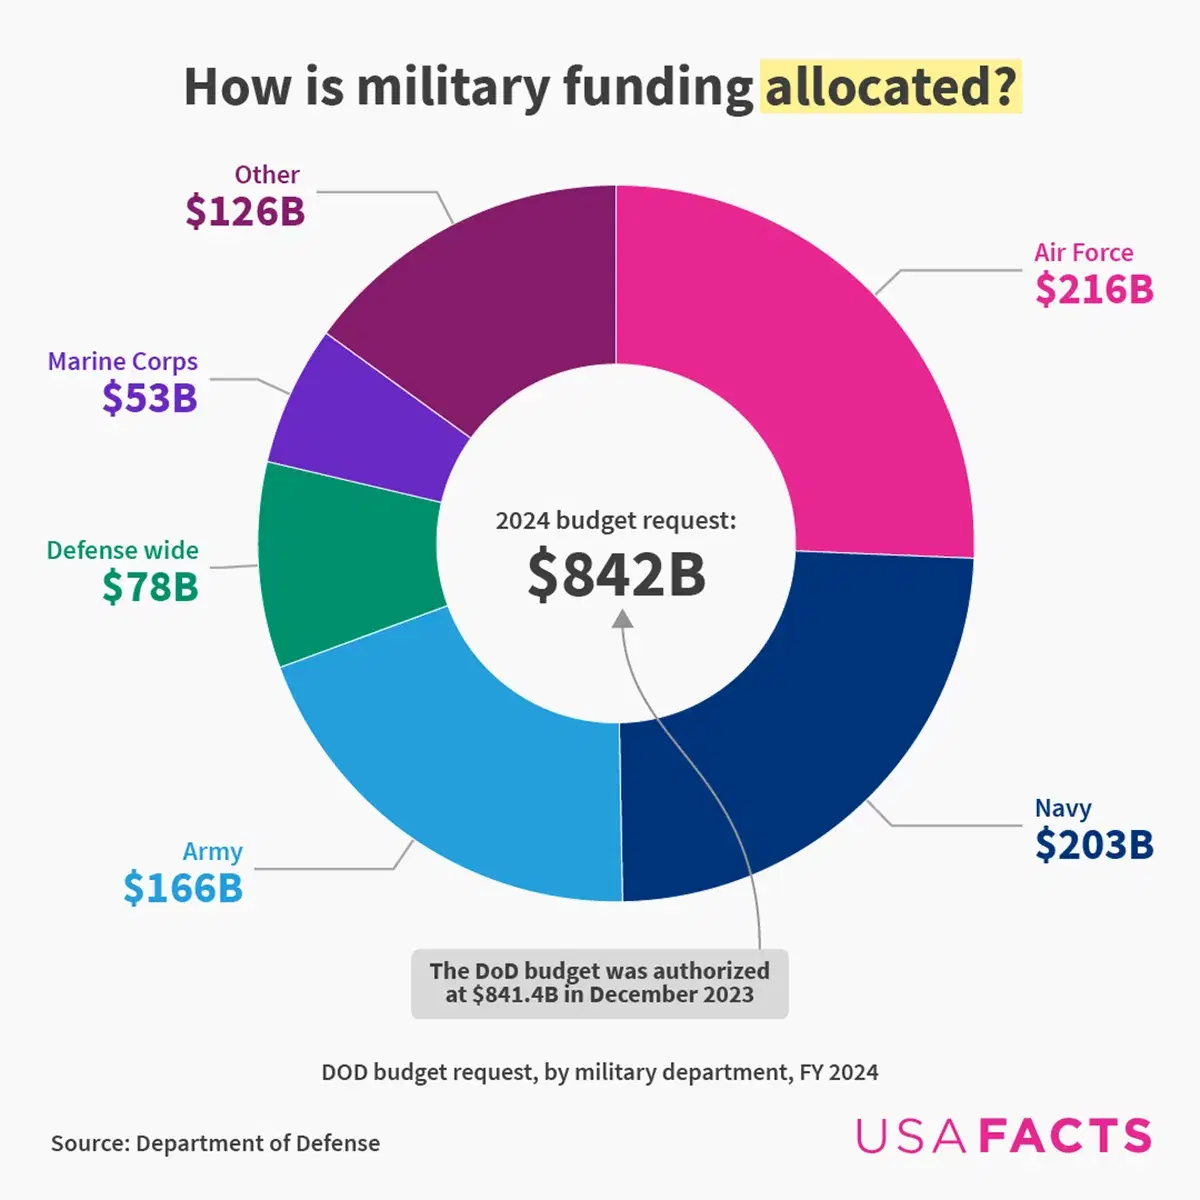 The Air Force Receives the Largest Portion of the Armed Forces' Funding